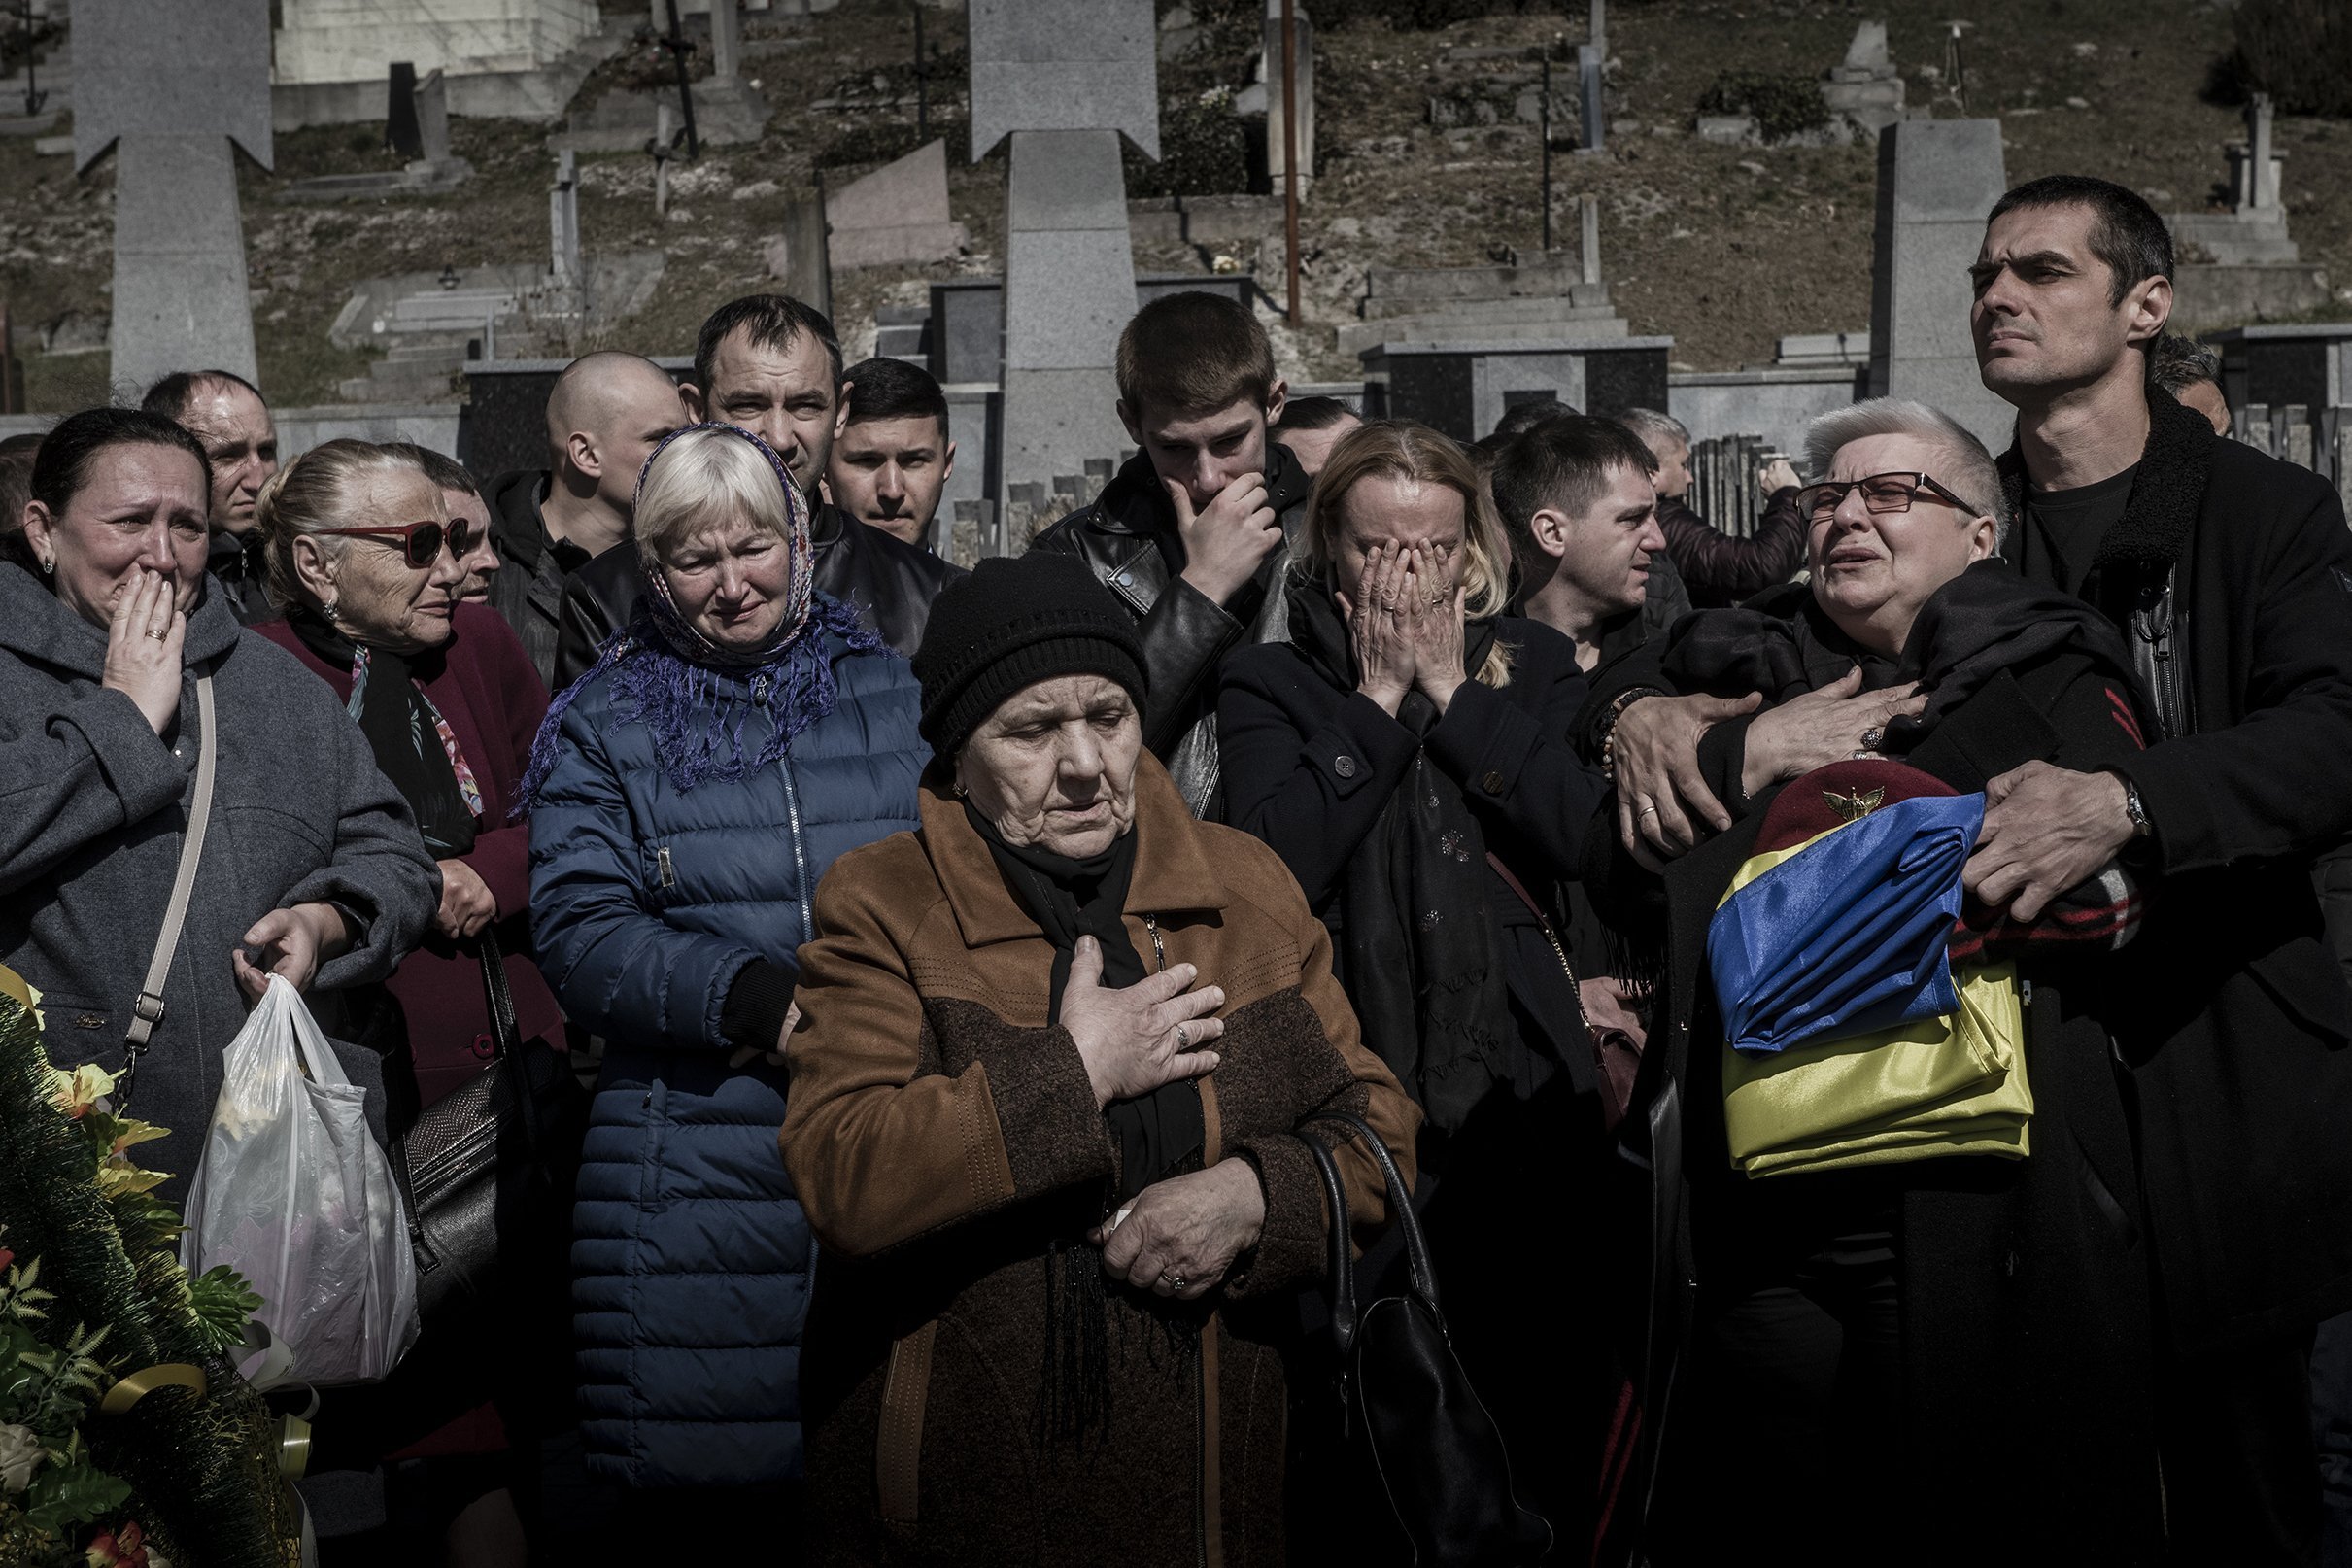  Family and friends grieve at the funeral of soldier Fedorchyk Ihor Volodymyrovych at the Lychhakiv cemetery in Lviv, Ukraine, March 24, 2022. Volodymyrovych was killed in combat in Nova Kakhovka, near Kherson, on the second day of Russia’s invasion 